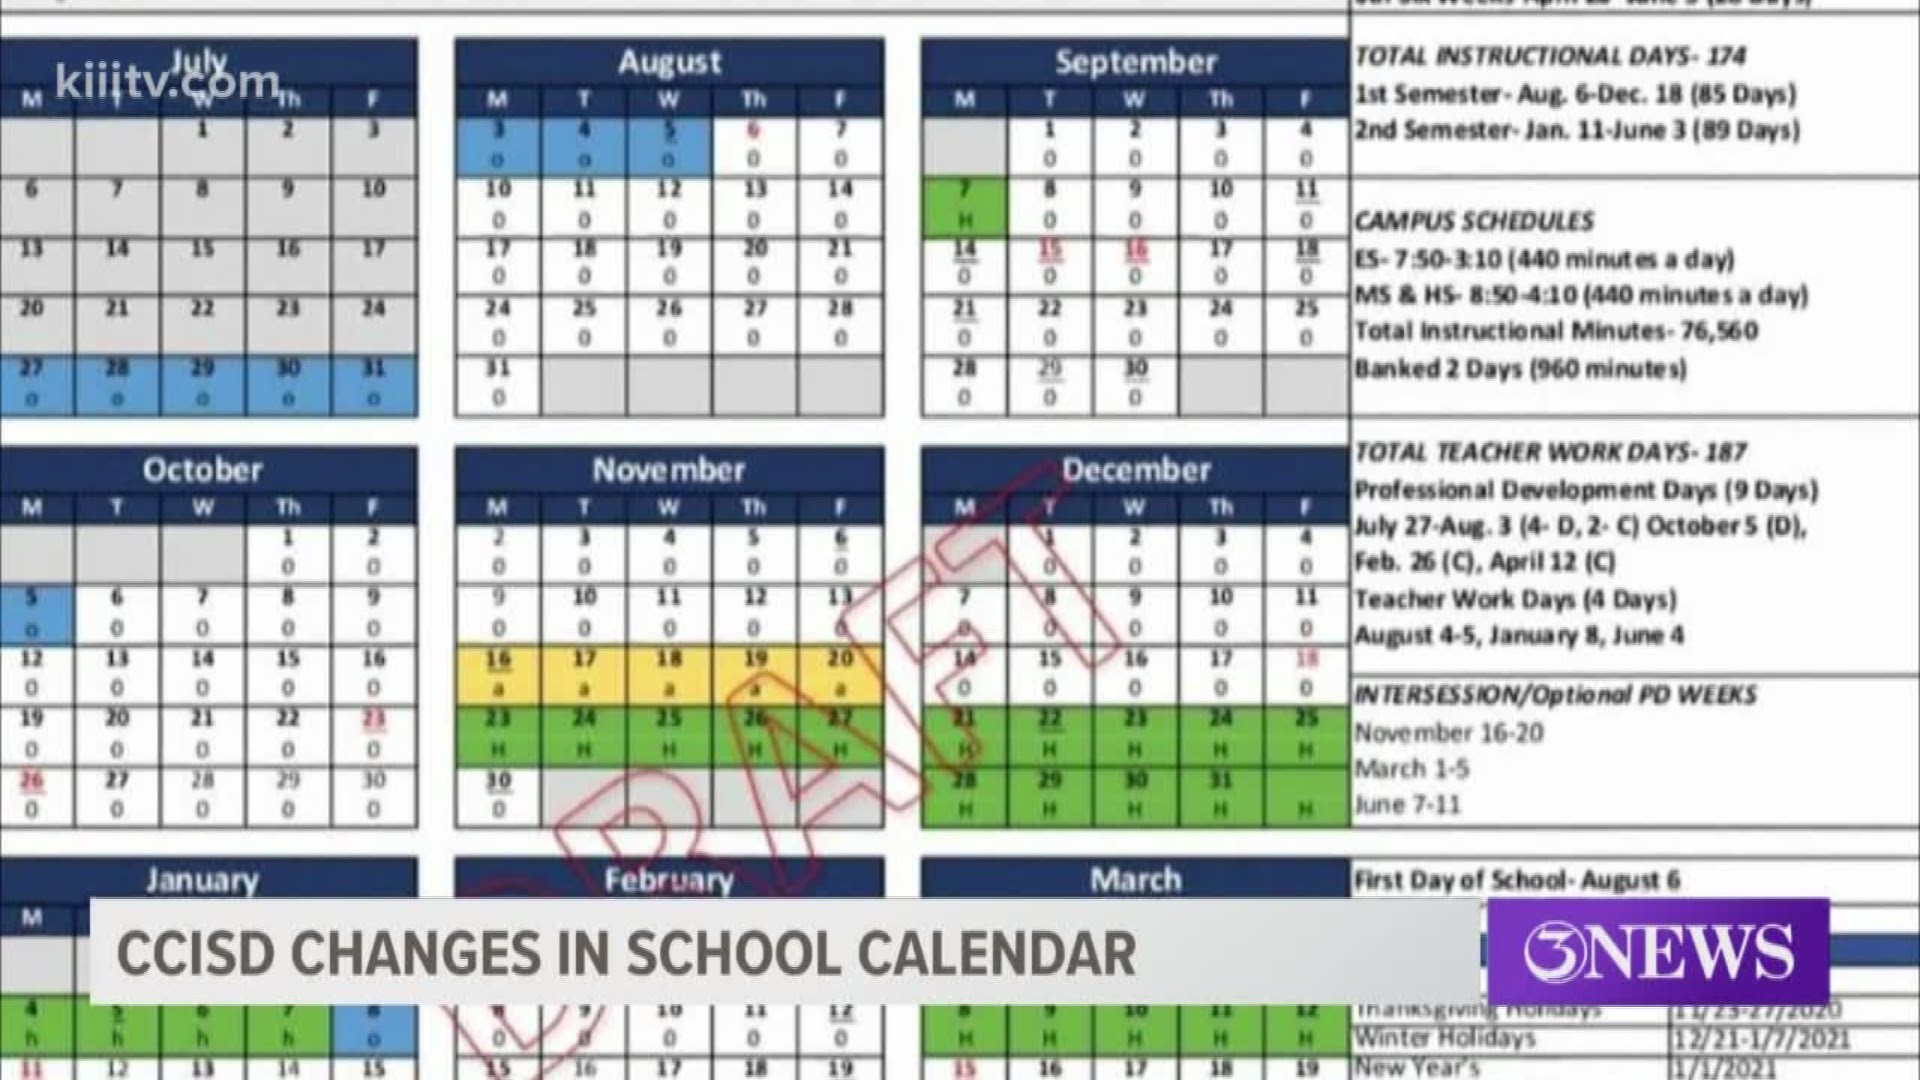 Could Year Round Schooling Be In The Future For Coastal Bend Students Ccisd Discusses Calendar Changes For 2020 2021 School Year Kiiitv Com